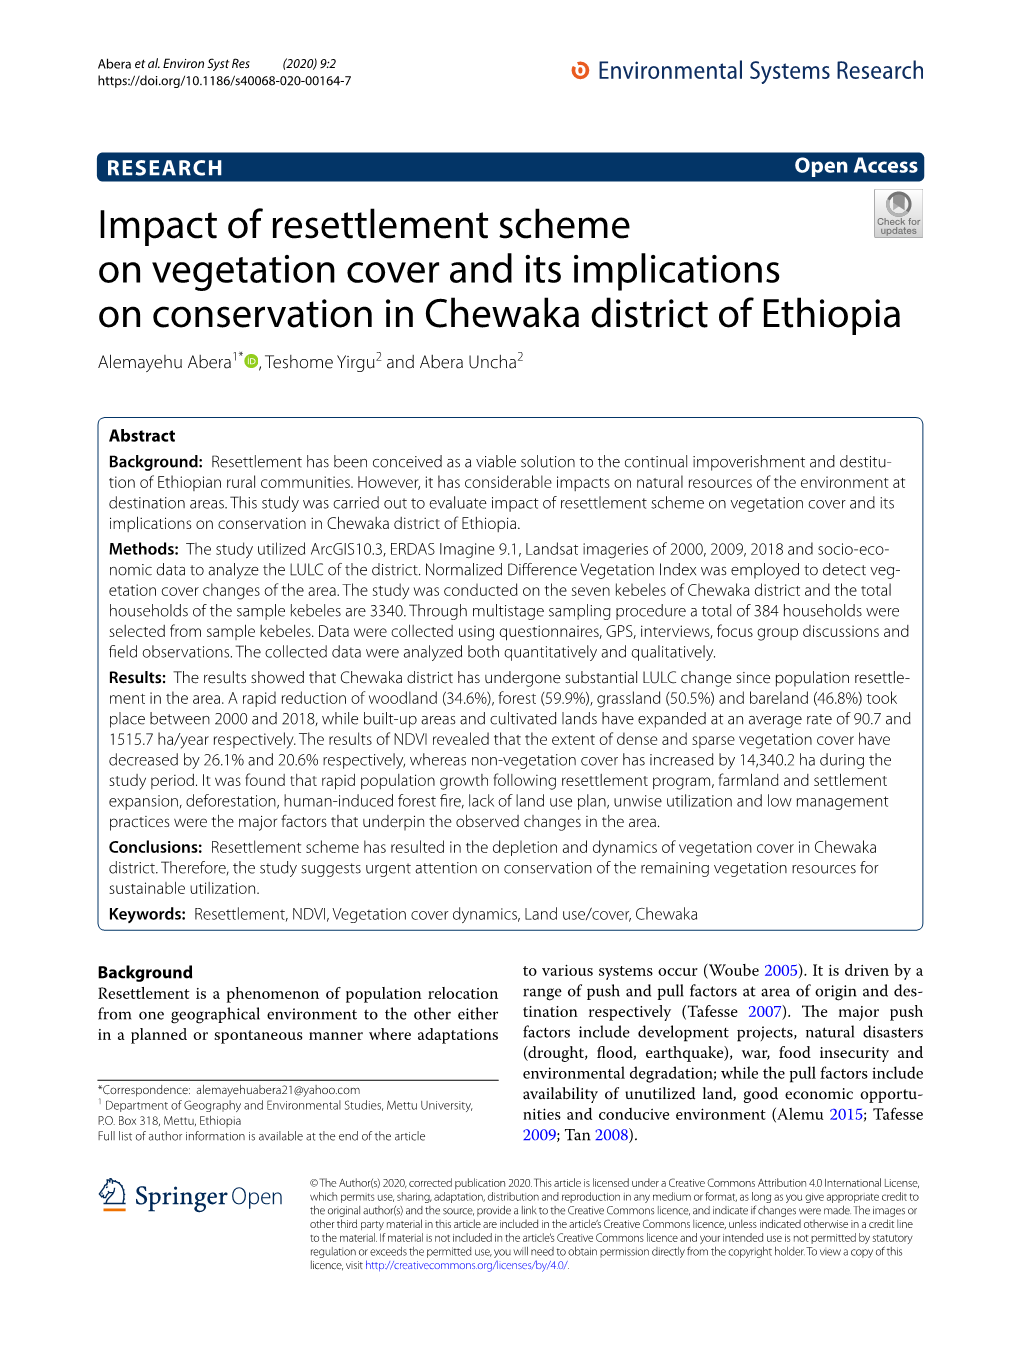 Impact of Resettlement Scheme on Vegetation Cover and Its